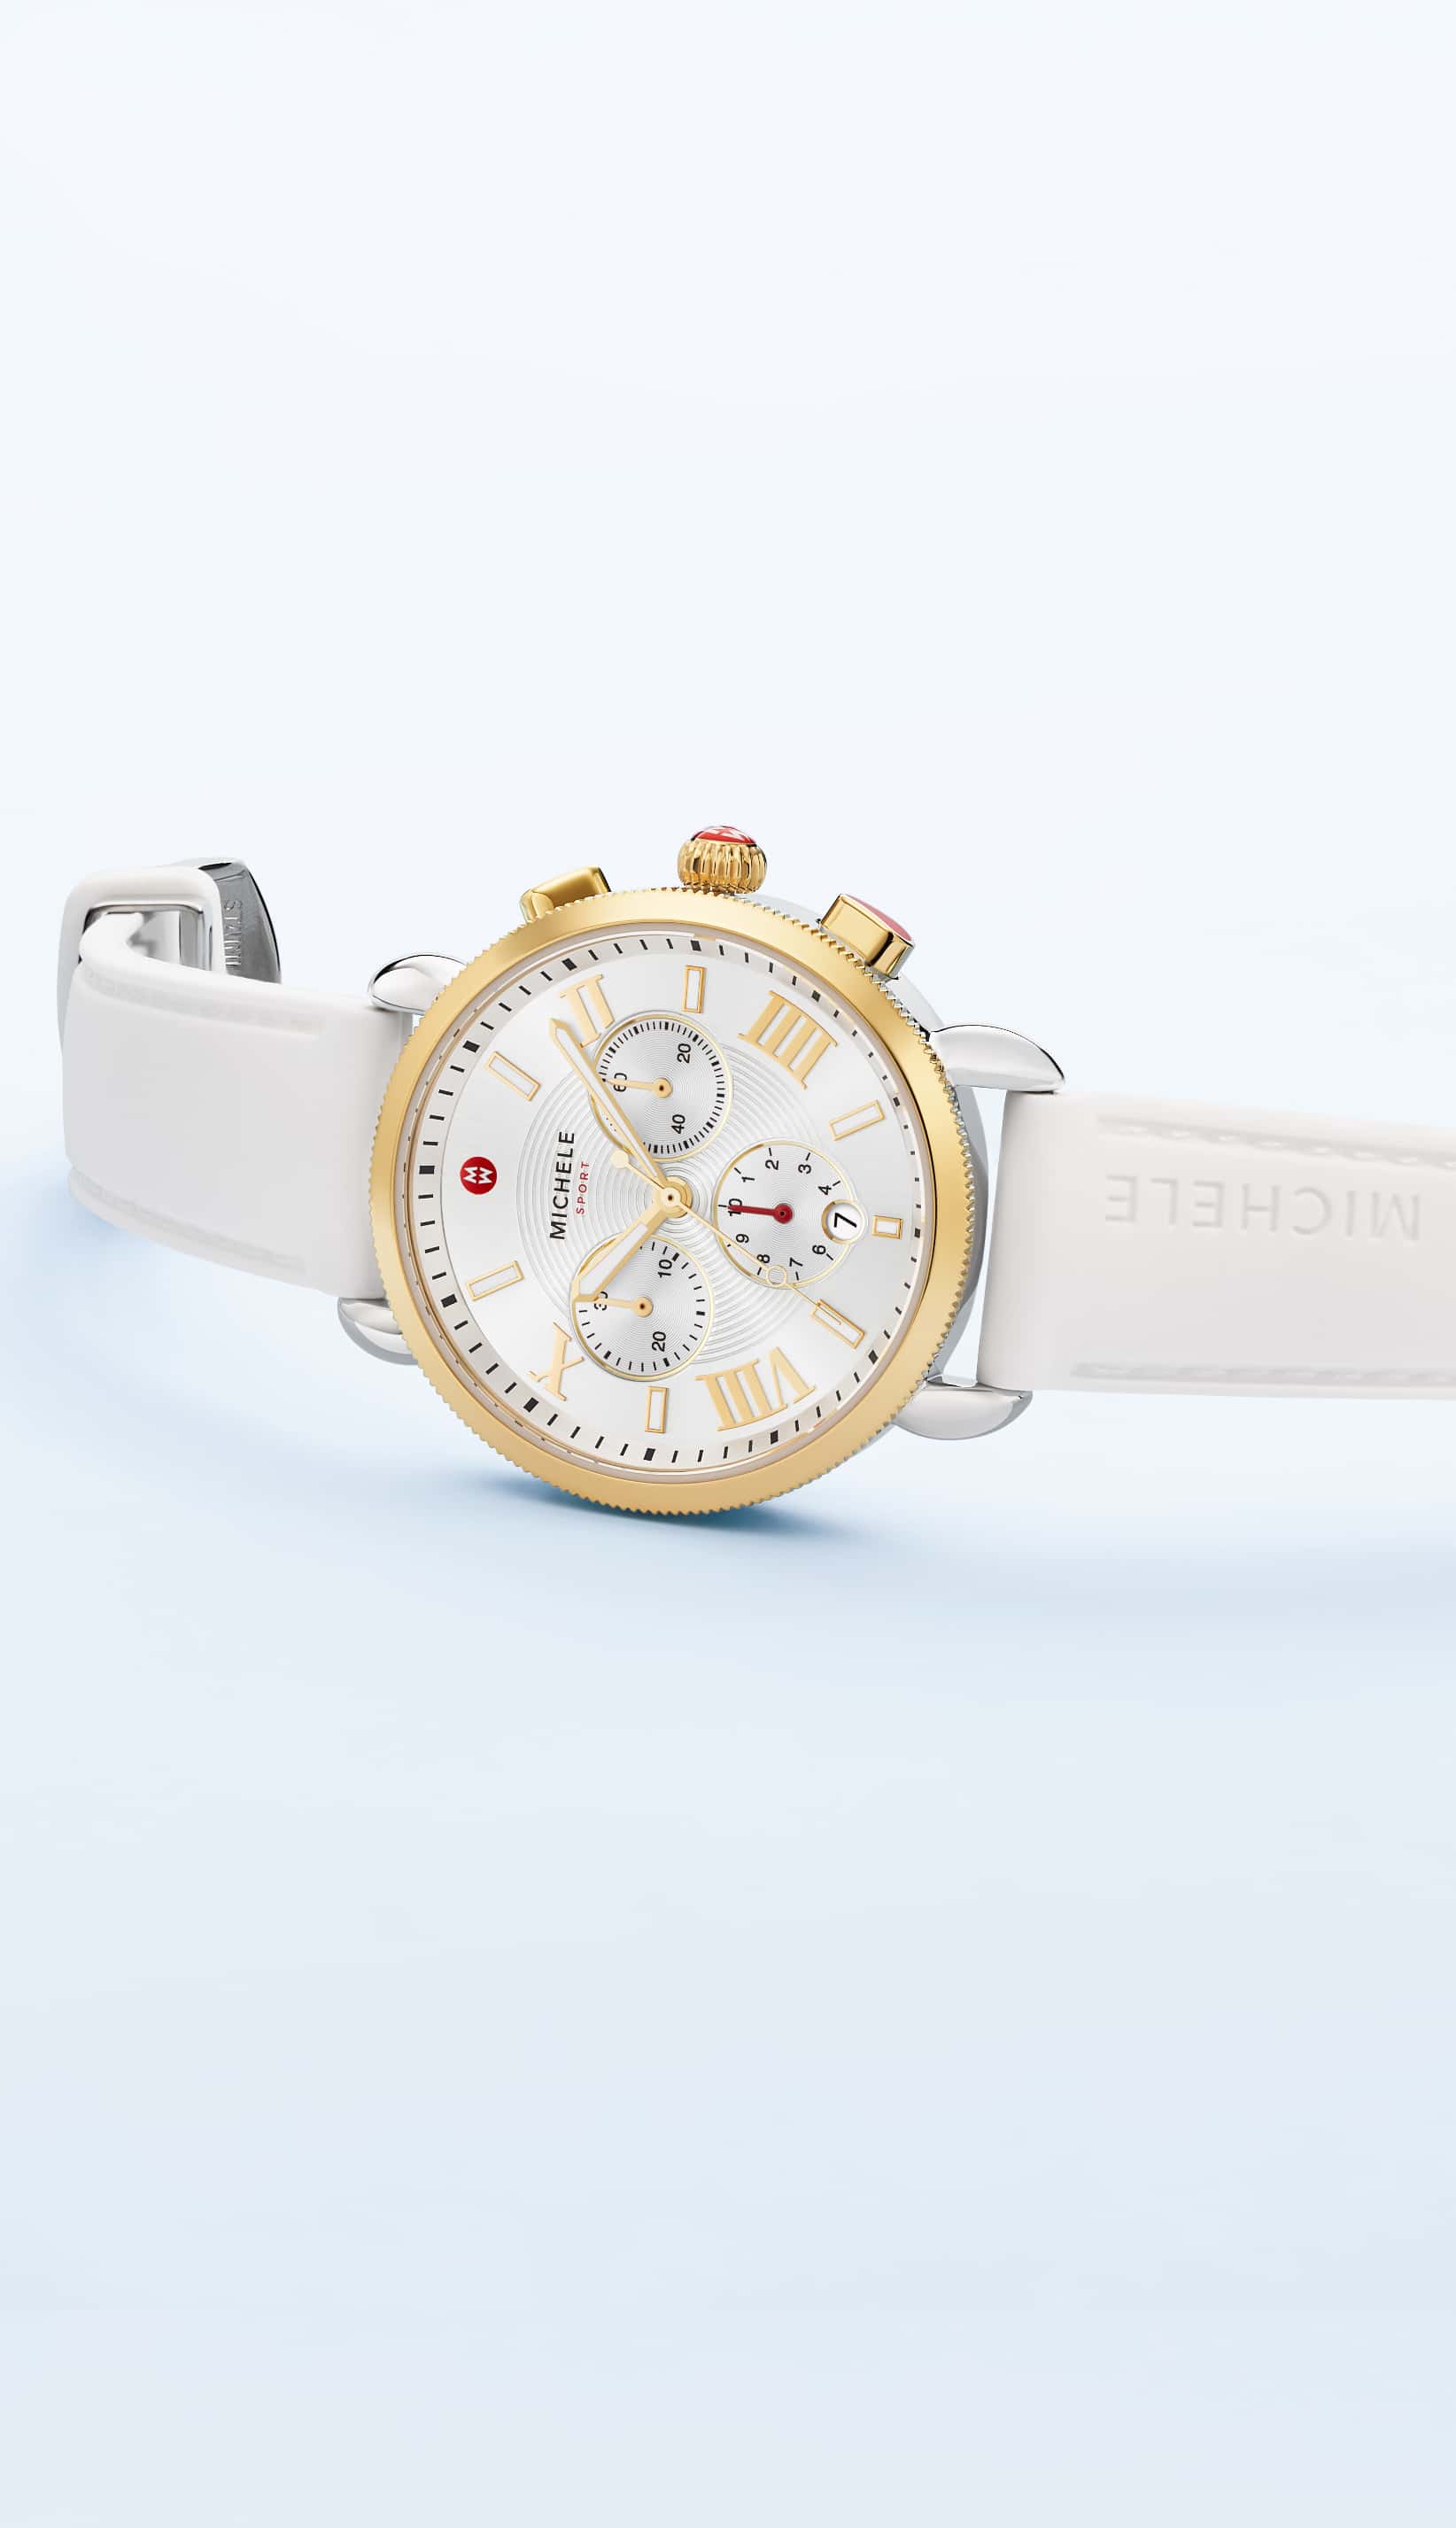 MICHELE Sporty Sport Sail watch in gold with white silicone band